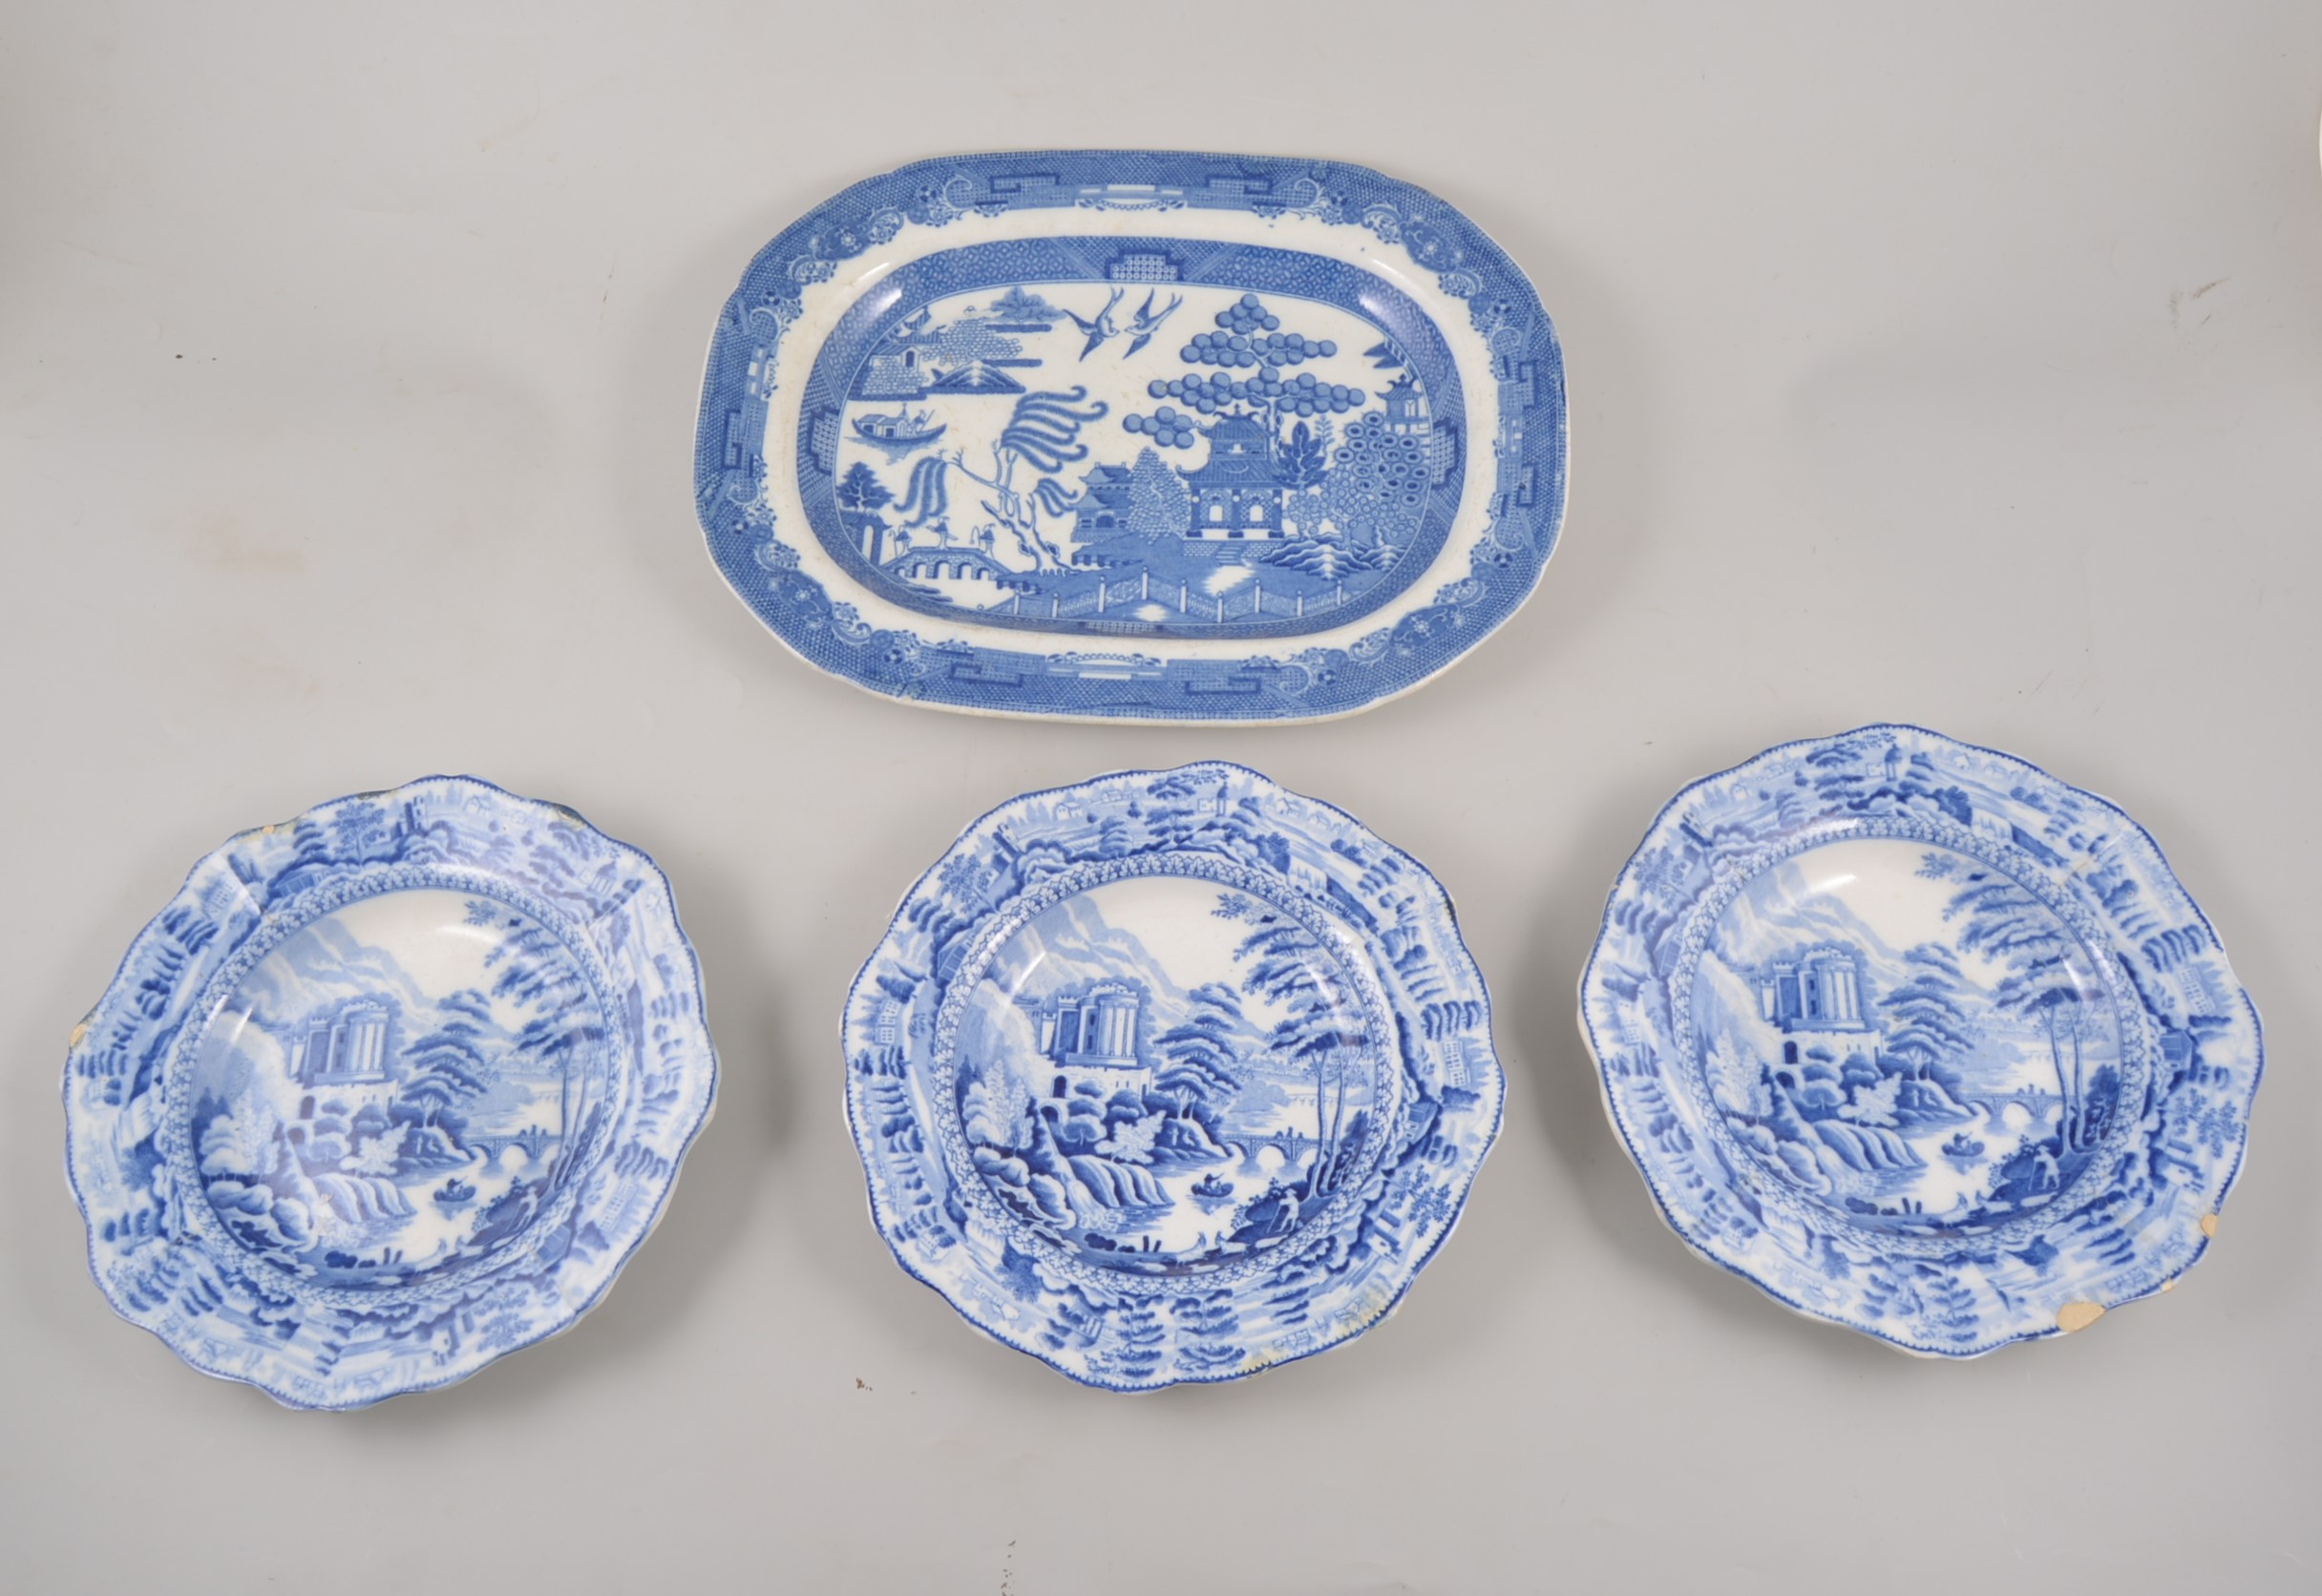 Four transfer ware dishes, a set of Riley's semi-china soup plates and other plates.